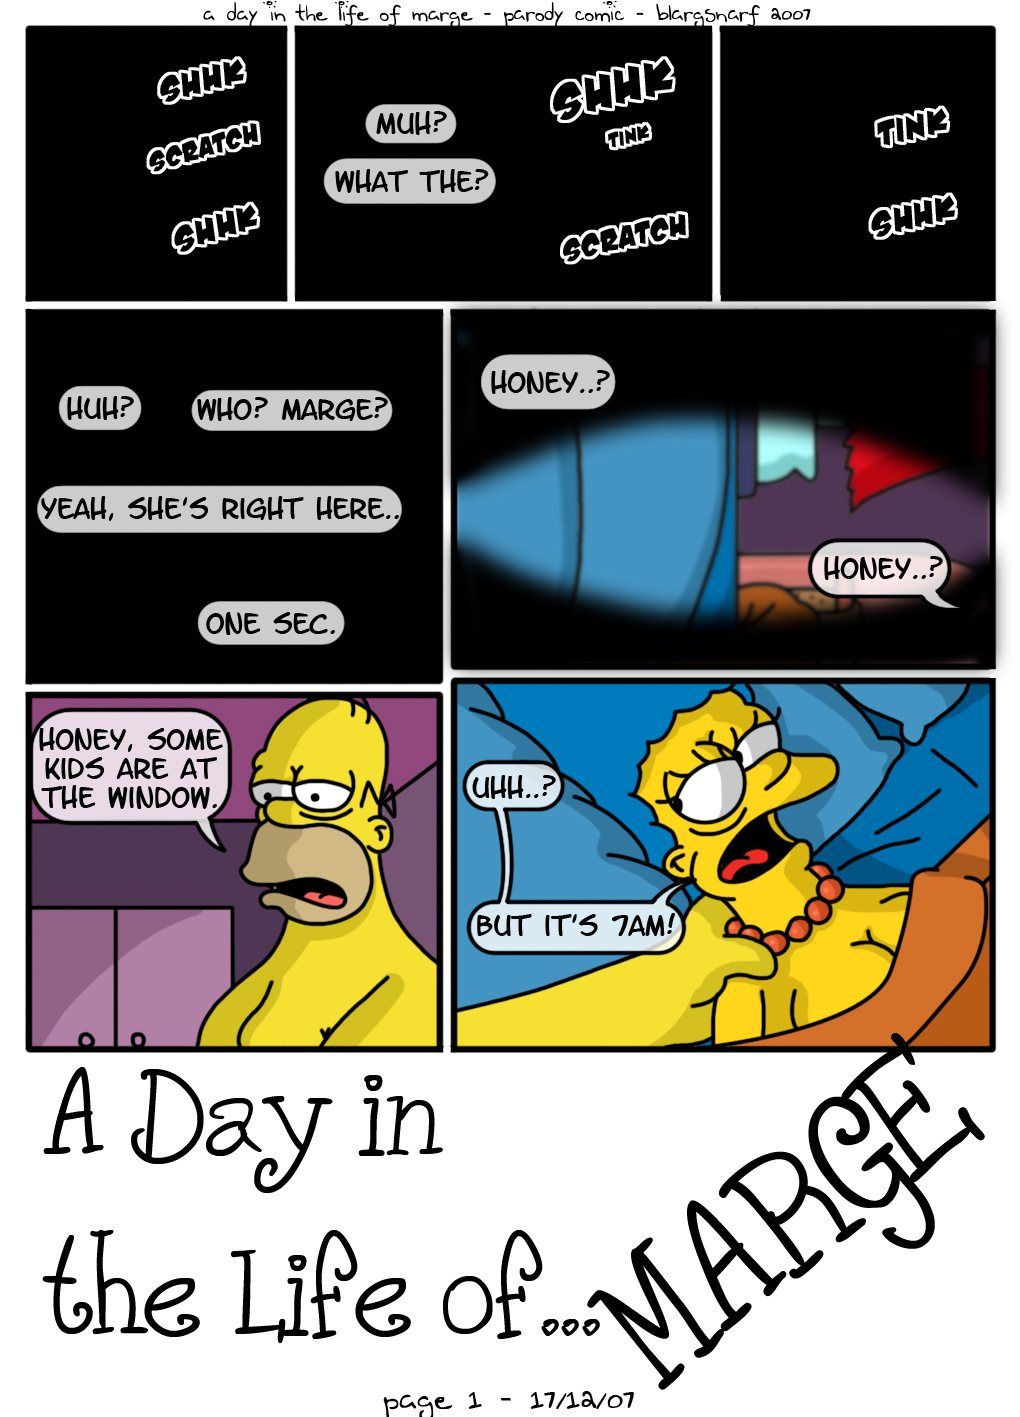 [Blargsnarf] A Day Life of Marge (The Simpsons) page 2